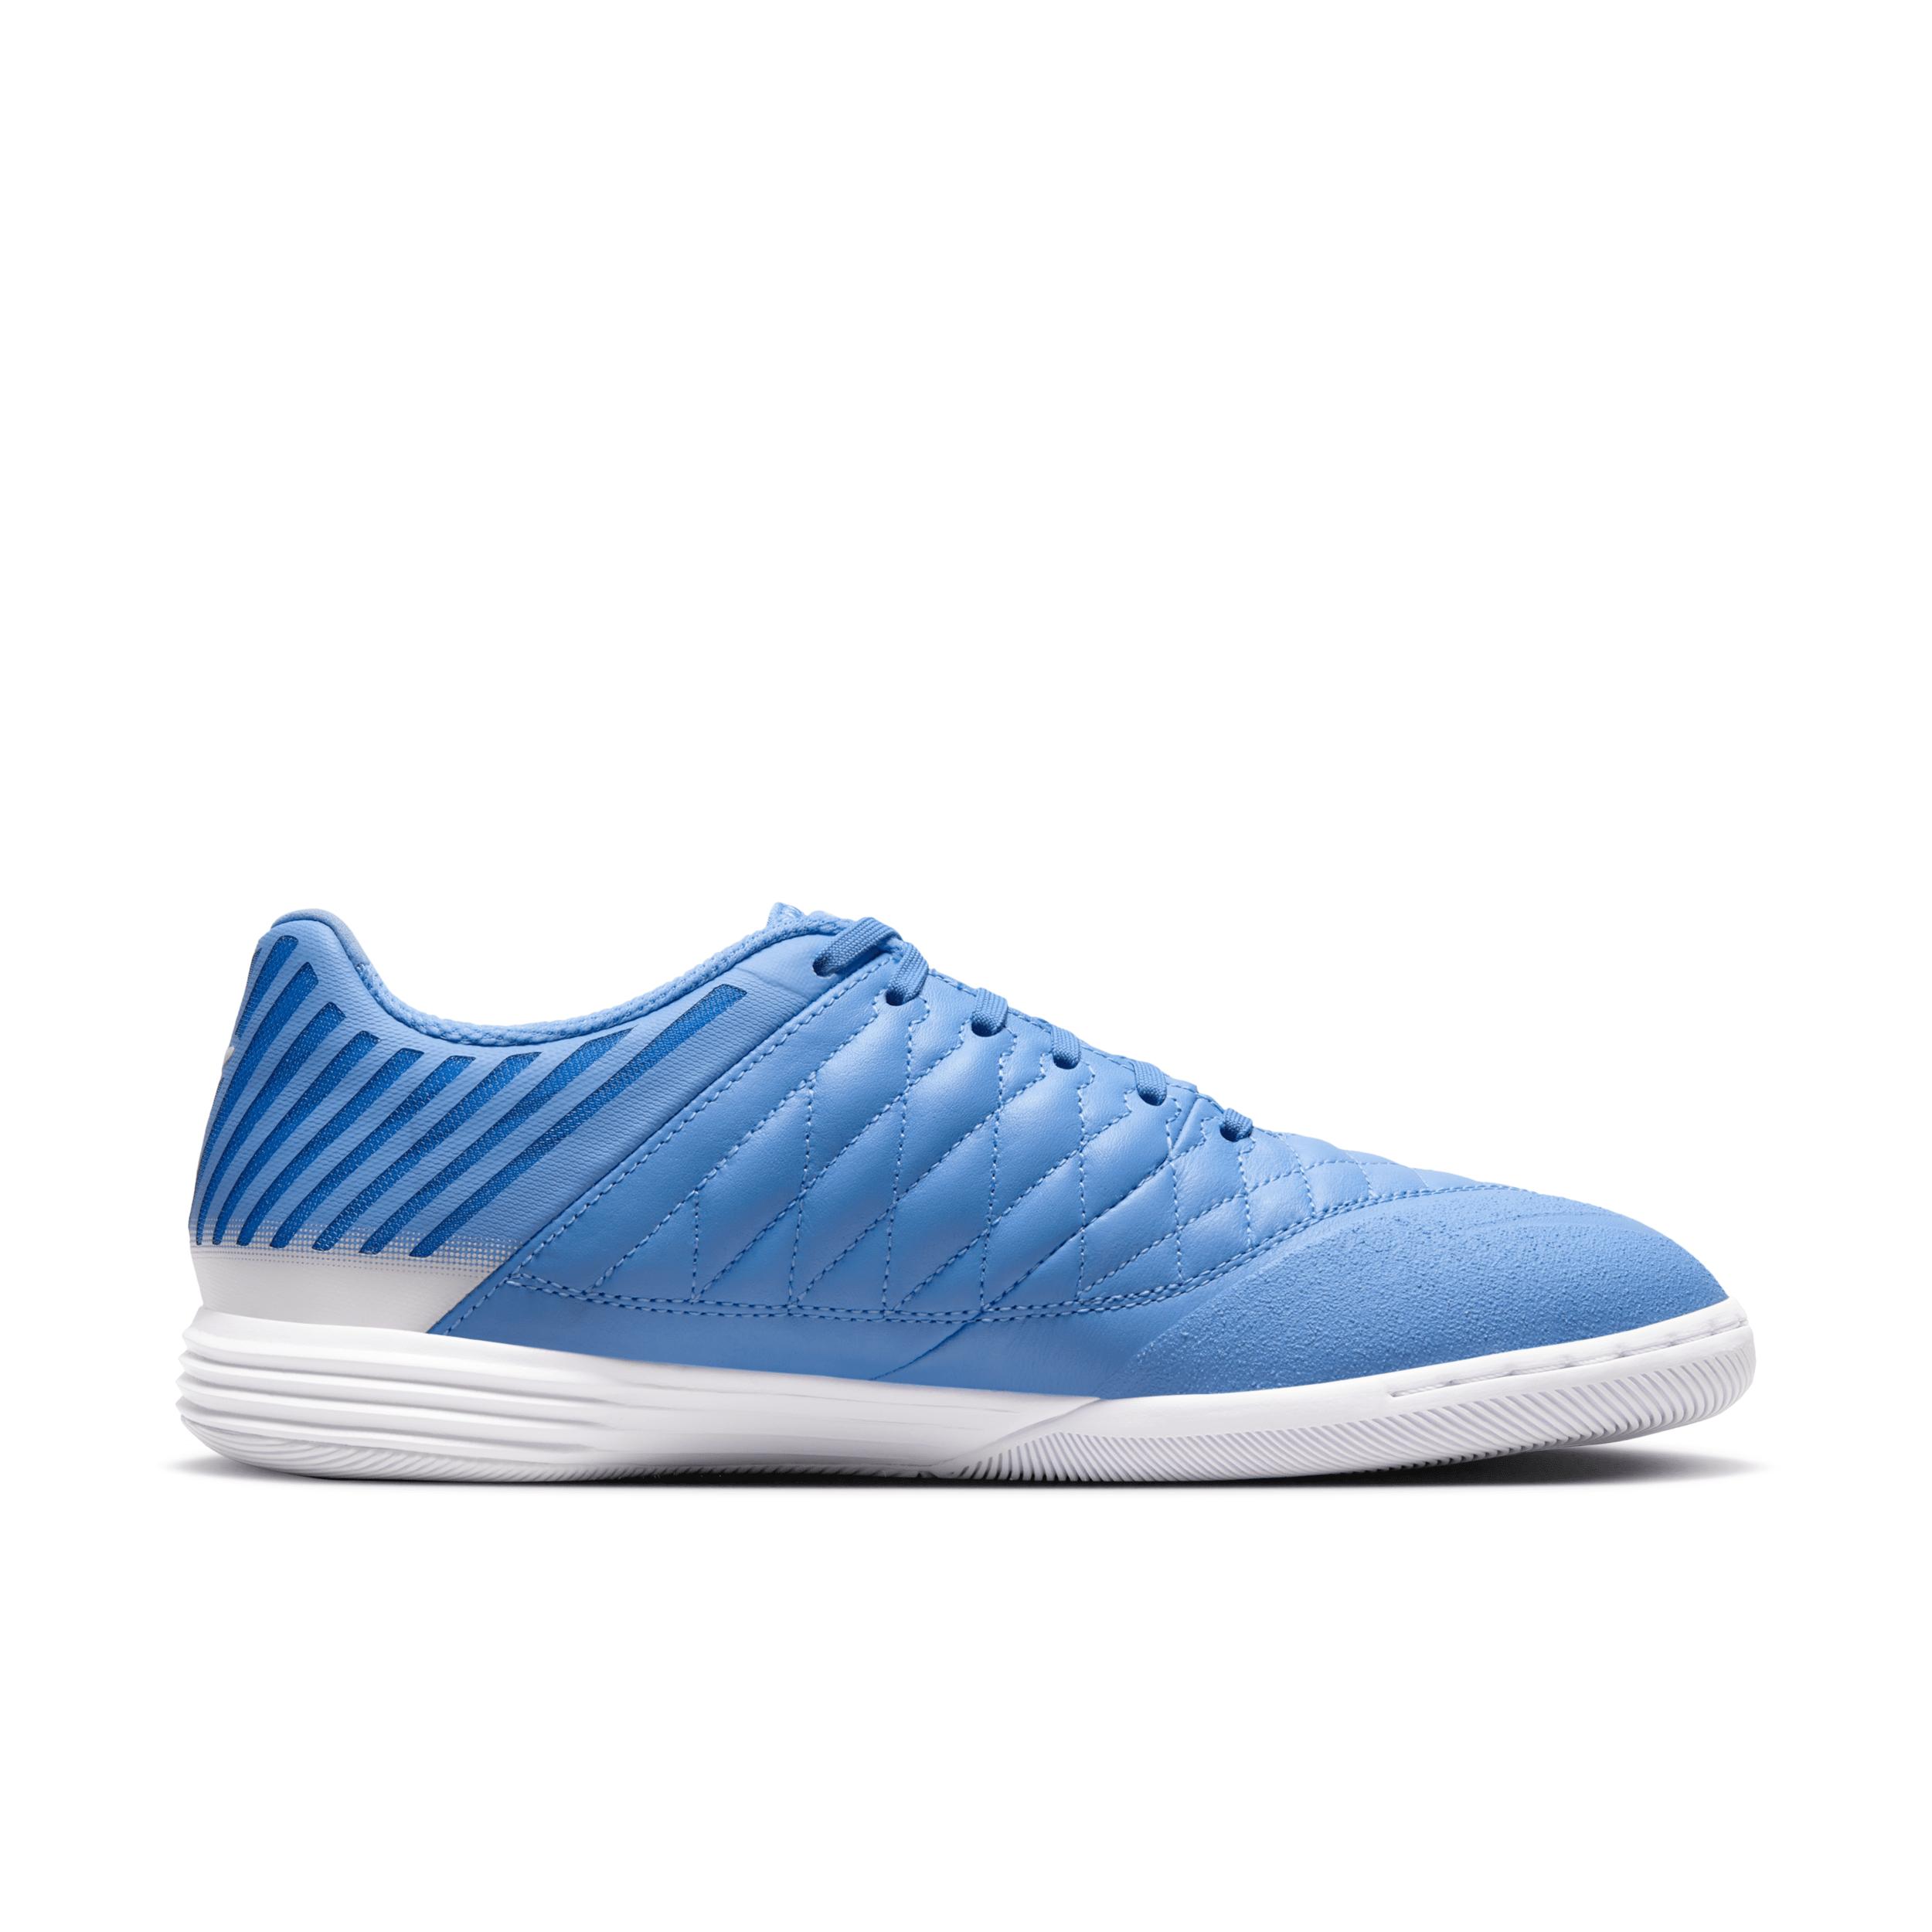 Nike Lunar Gato Ii Indoor Court Football Shoes in Blue | Lyst